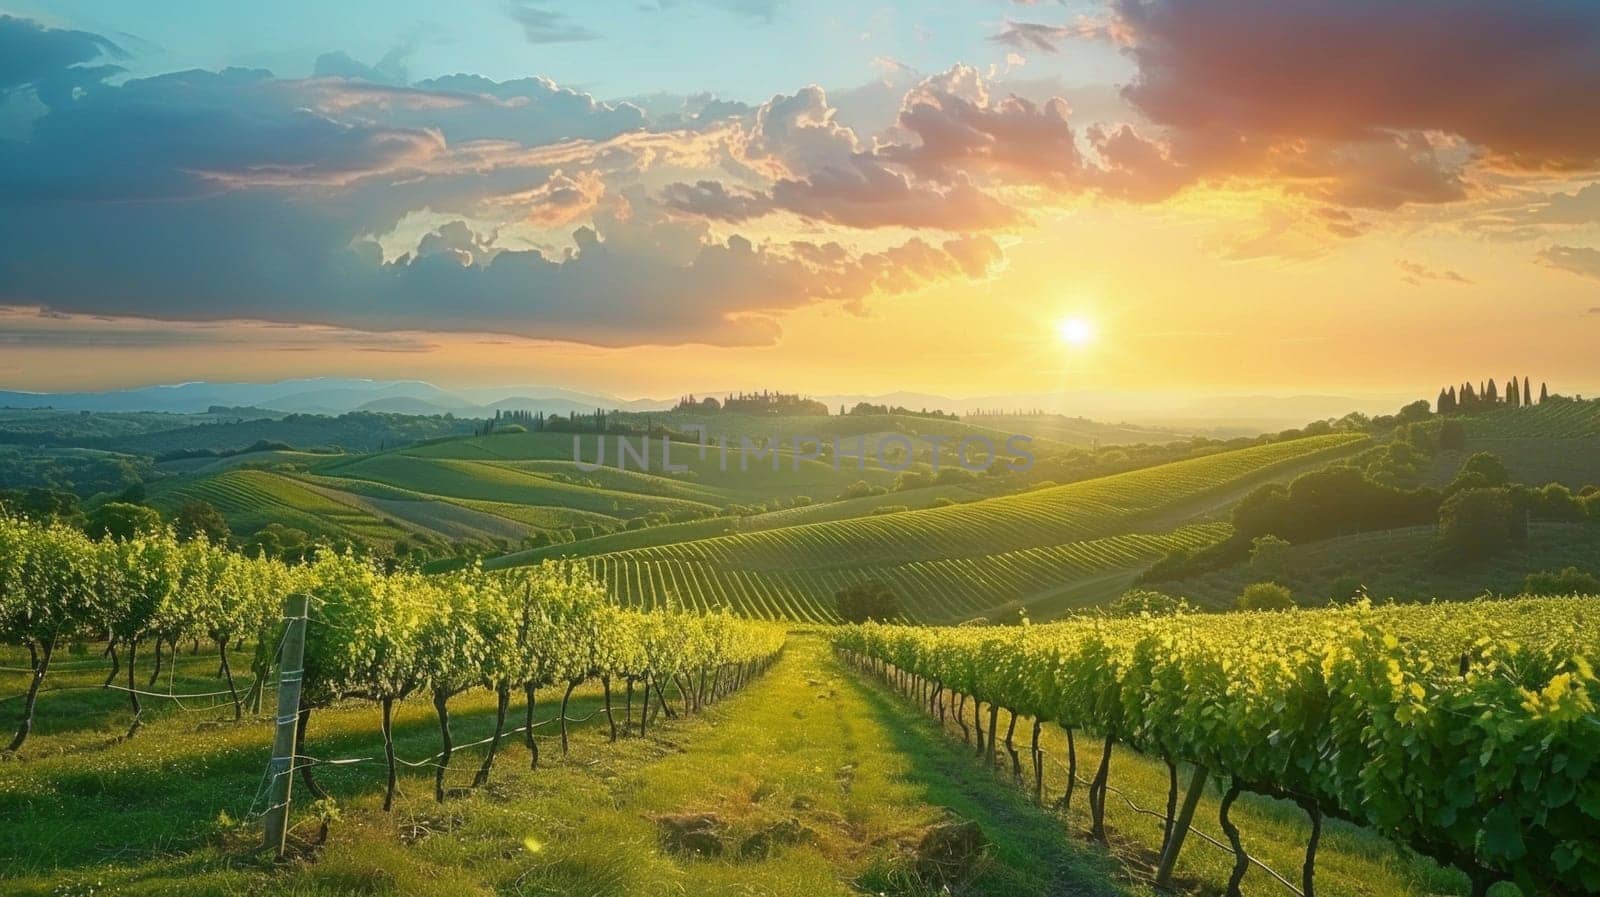 A vineyard with green grass and hills in the distance